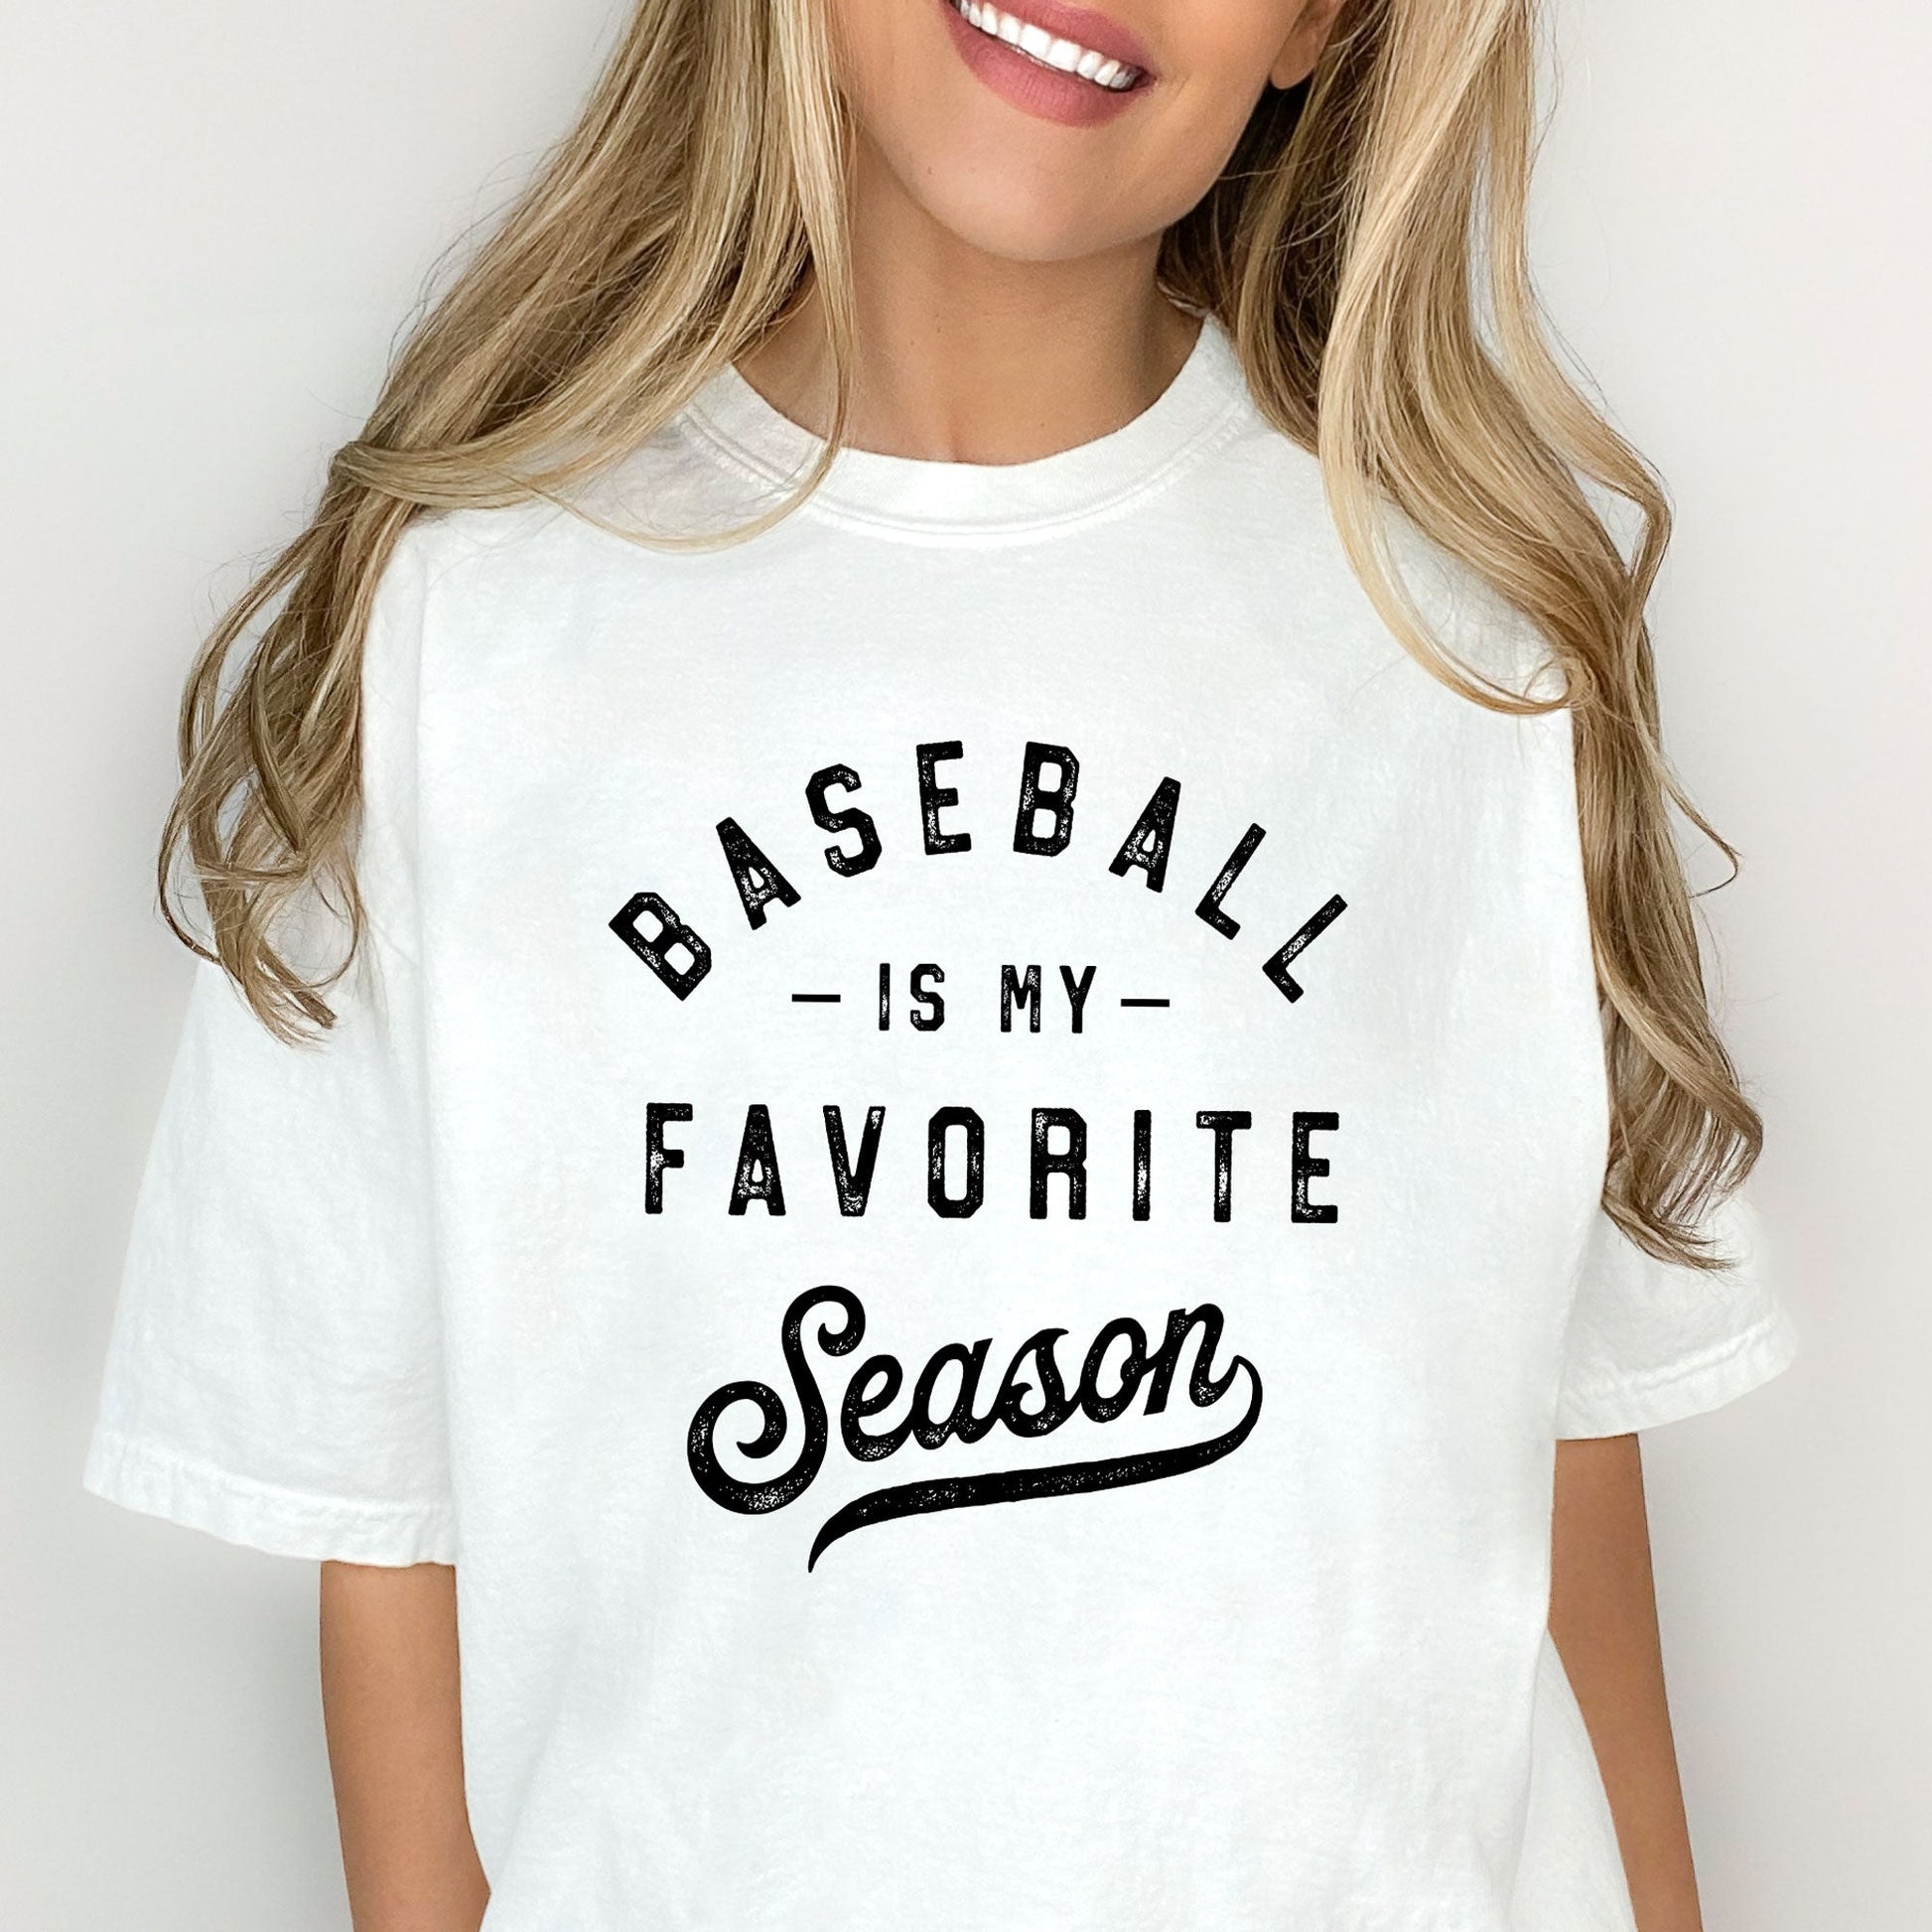 woman wearing a white t-shirt featuring a distressed dtg print reading 'baseball is my favorite season'